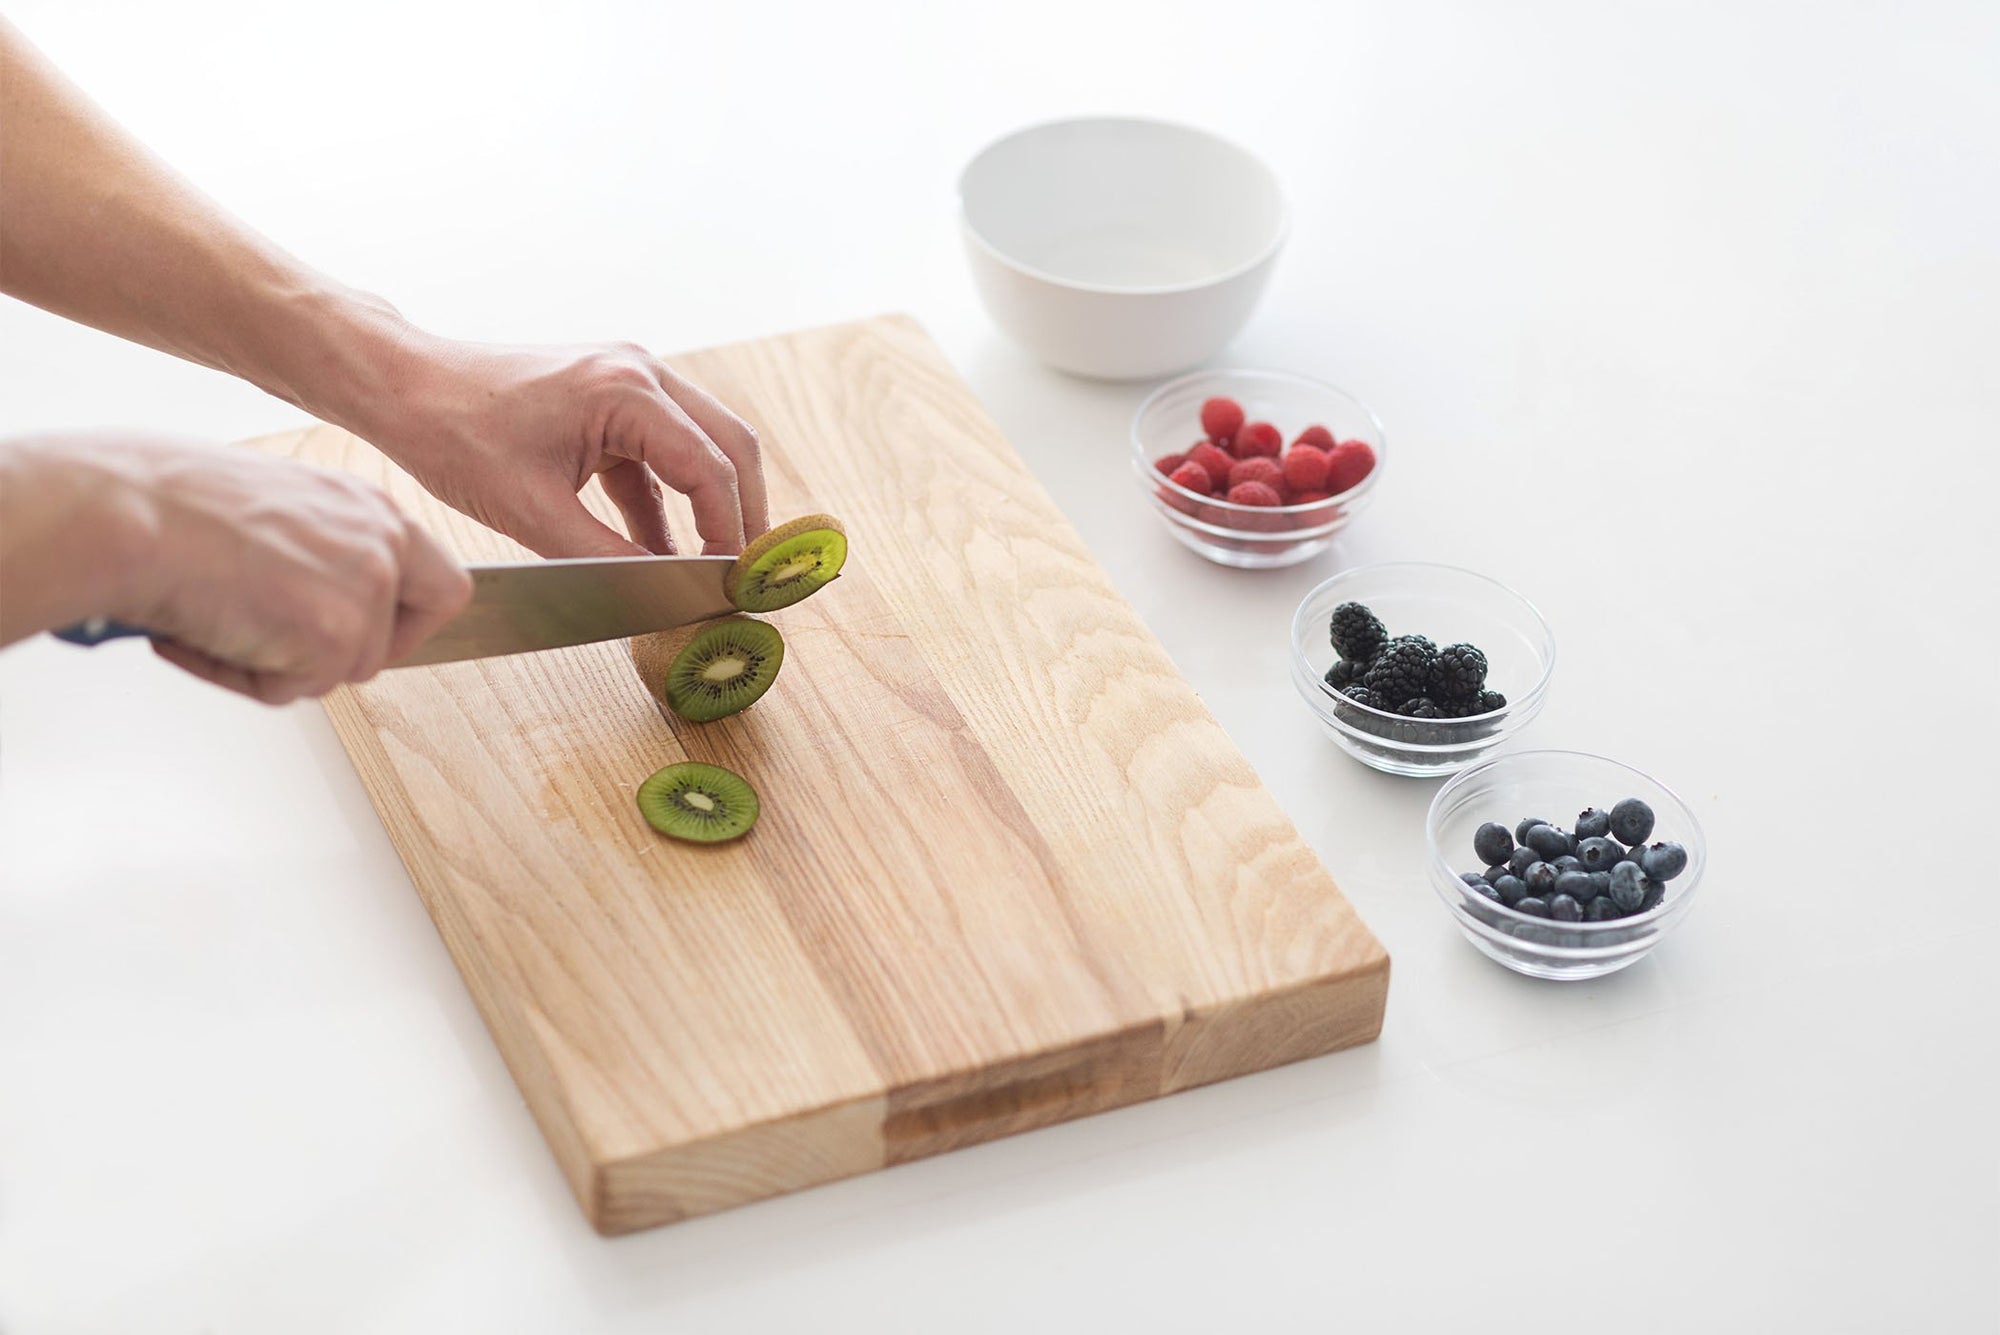 Chopping Board Hygiene: the Dos and Don'ts, Cooking Tips